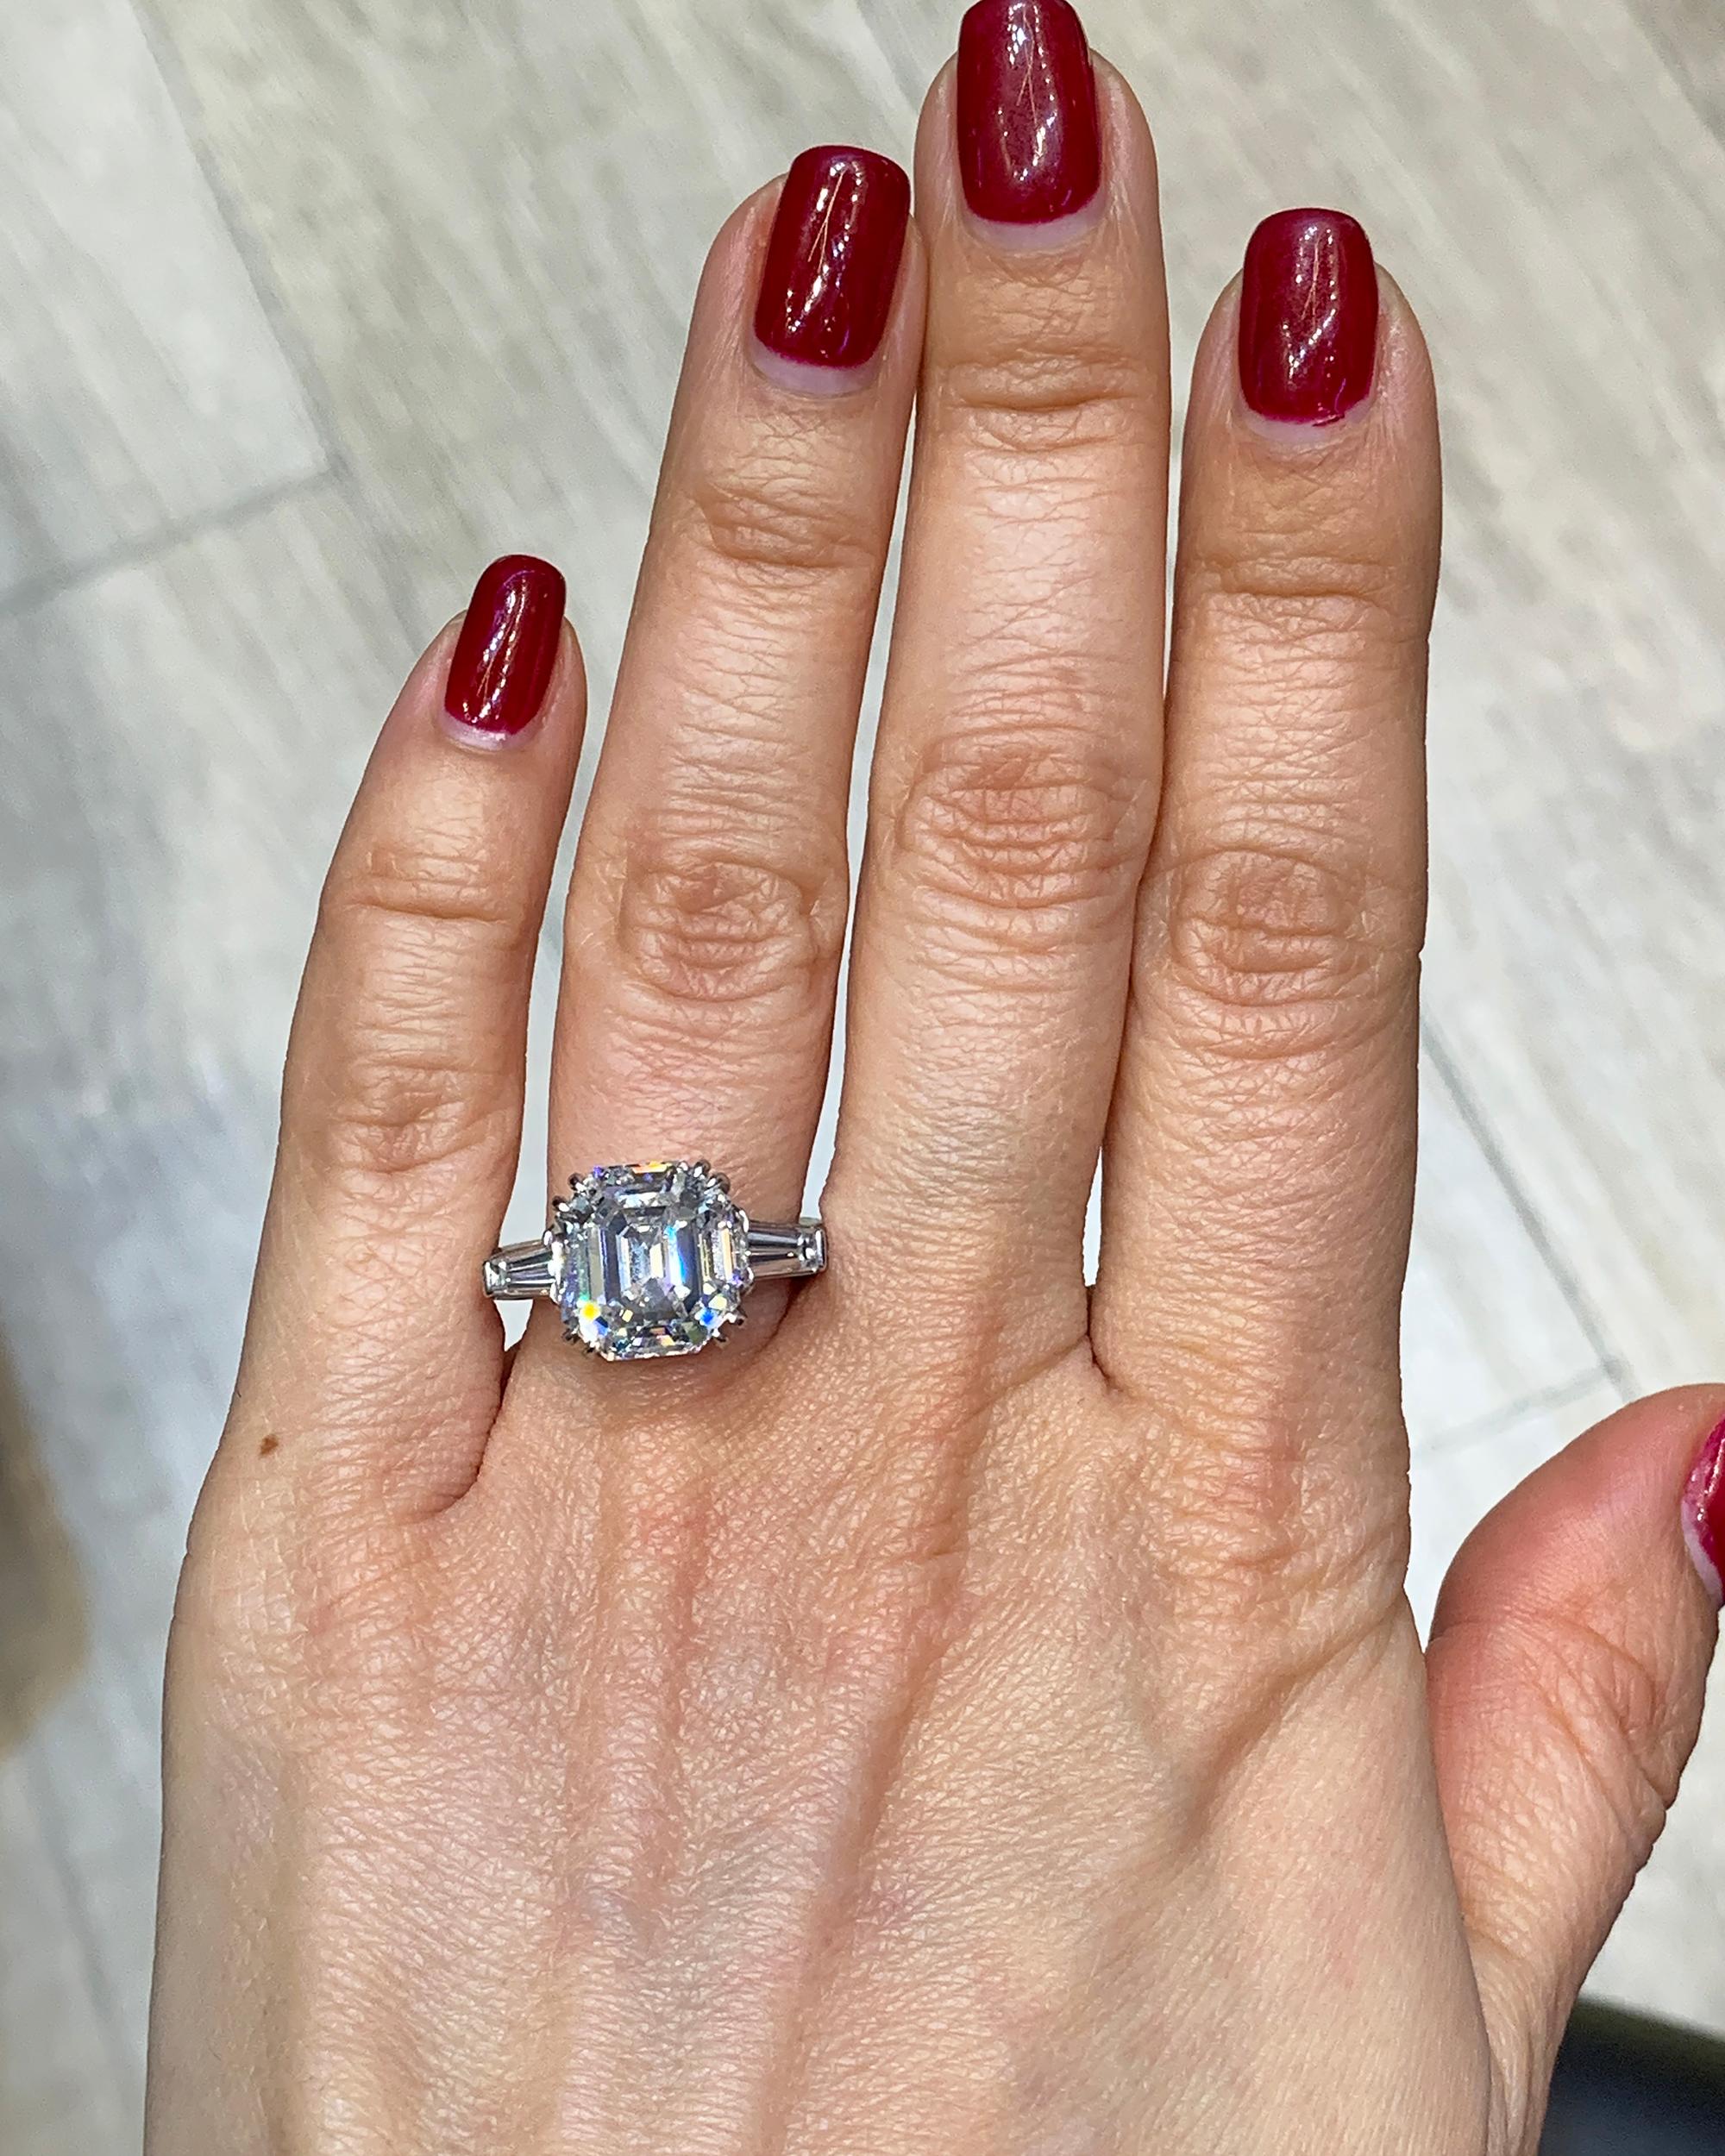 Like an opera singer in her prime, this Diamond Engagement Ring, made by Spectra Fine Jewelry in the Contemporary era, 2018, hits all the high Cs—cut, carat, color, and clarity. The emerald-cut diamond weighs an estimated 5.51 carats. It is